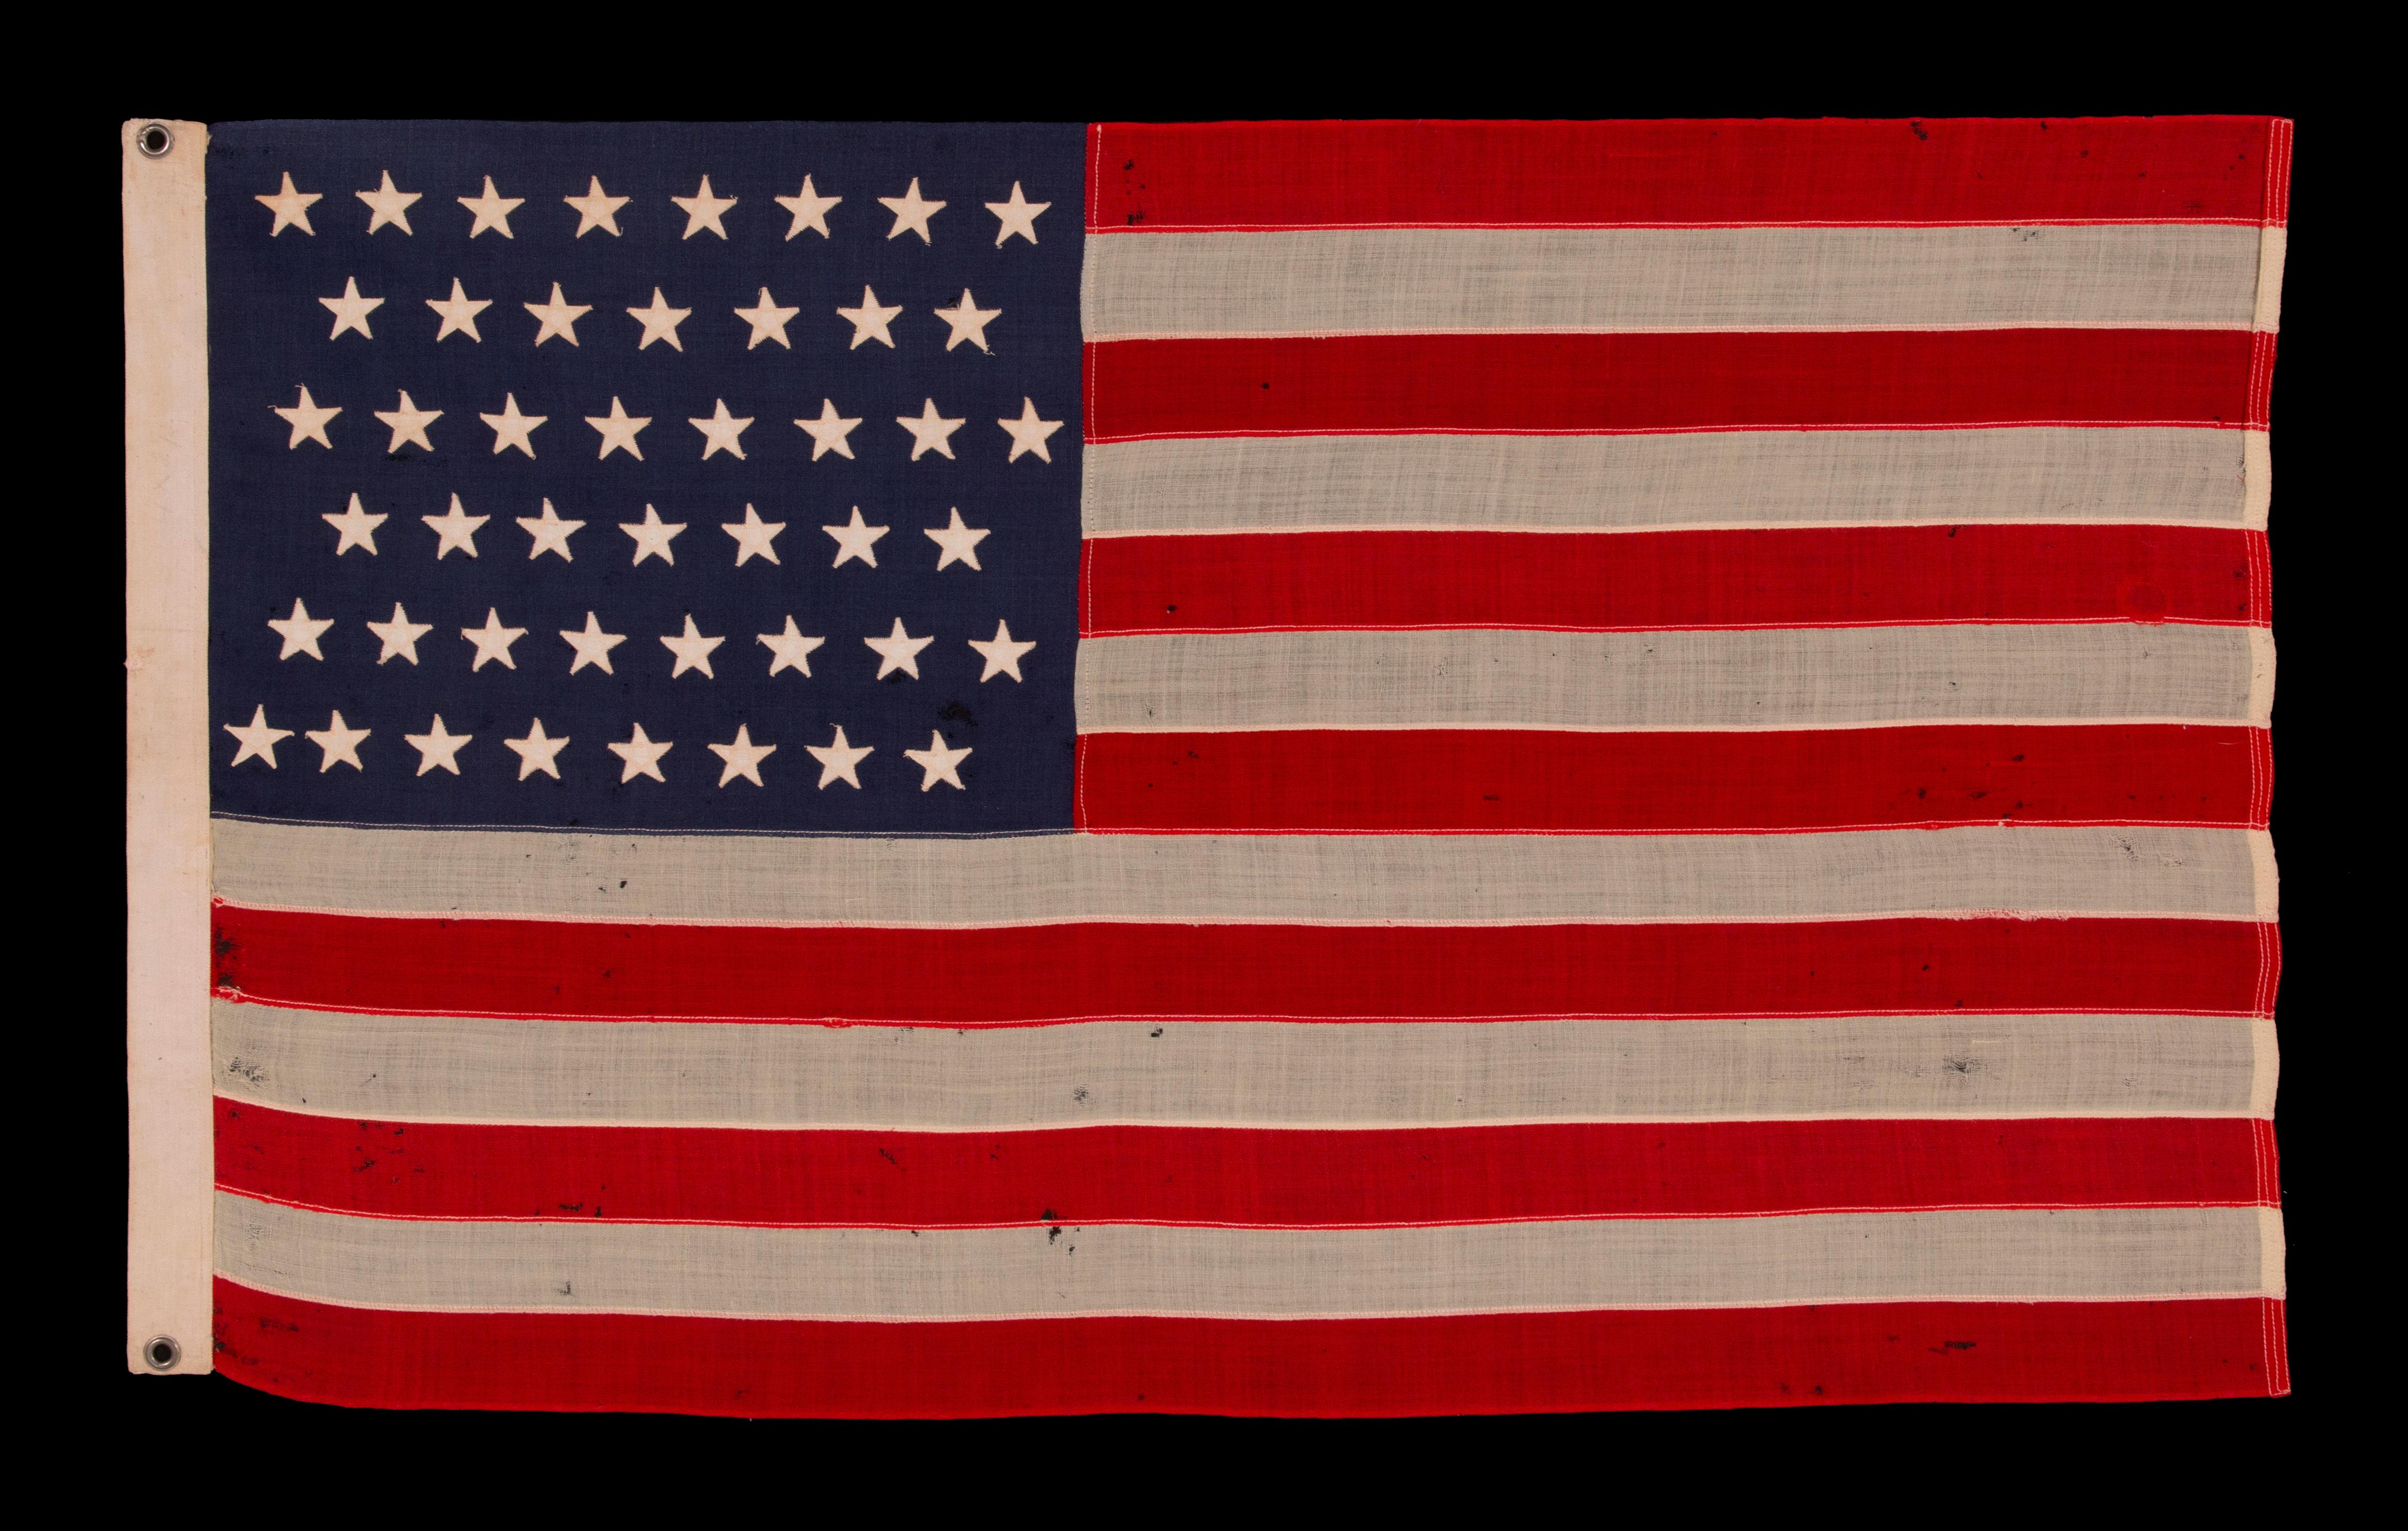 46 star antique American flag in an exceptionally small scale among its pieced-and-sewn counterparts, reflects oklahoma statehood, circa 1907-1912:

46 star American national flag in a tiny and very rare scale among its counterparts of the period